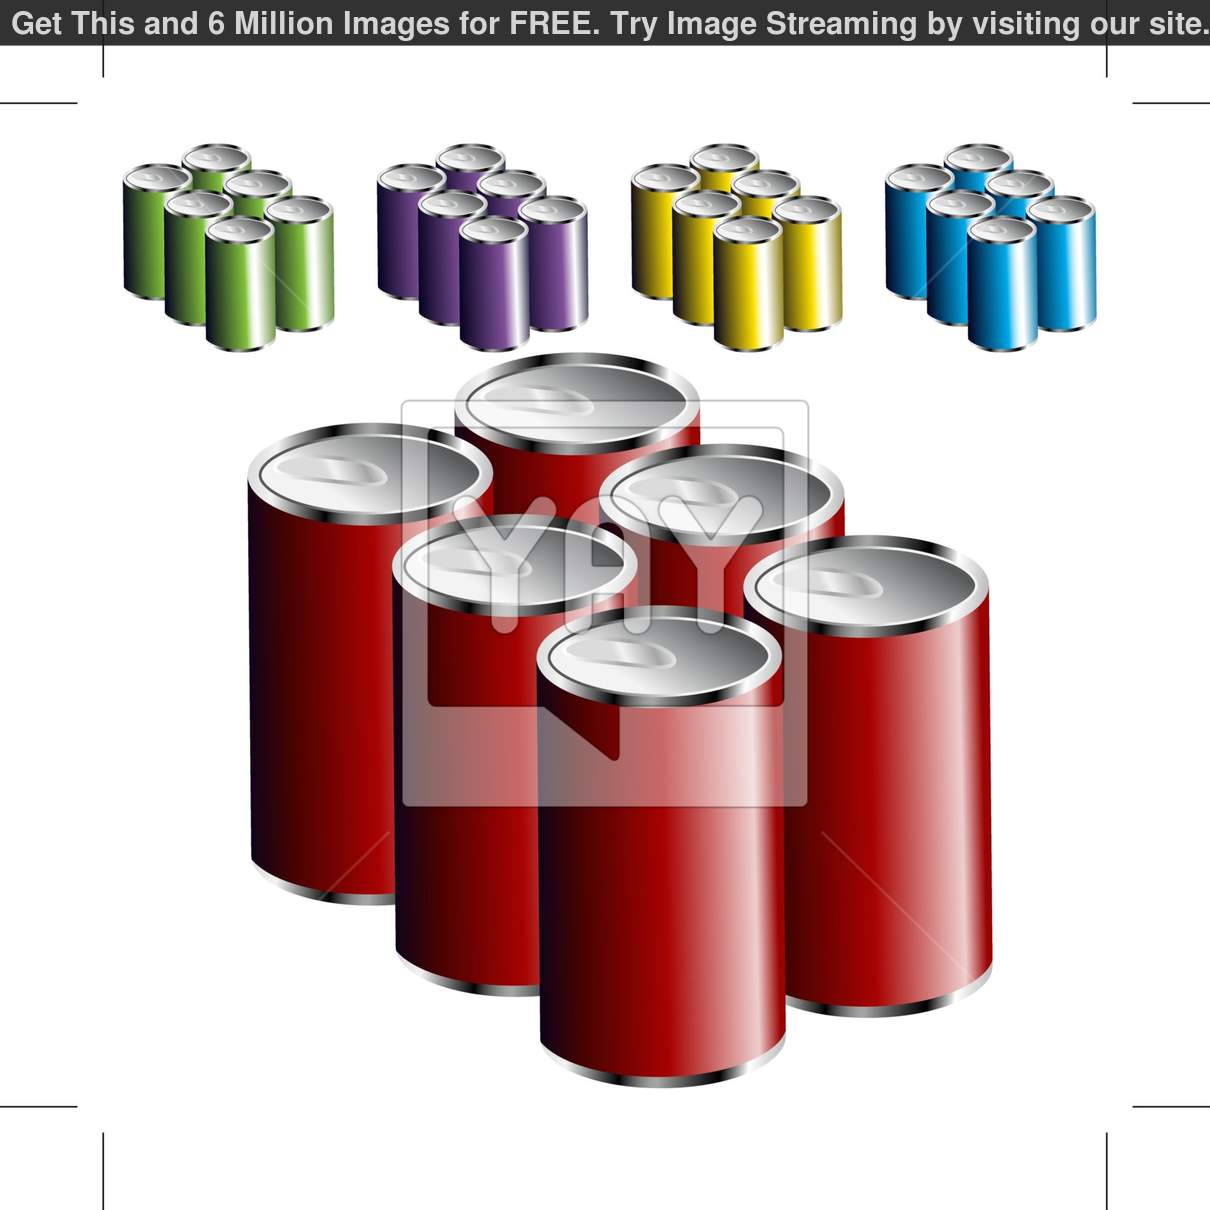 Soda Six Pack Clipart Displaying 20 Images For Soda Six Pack Clipart